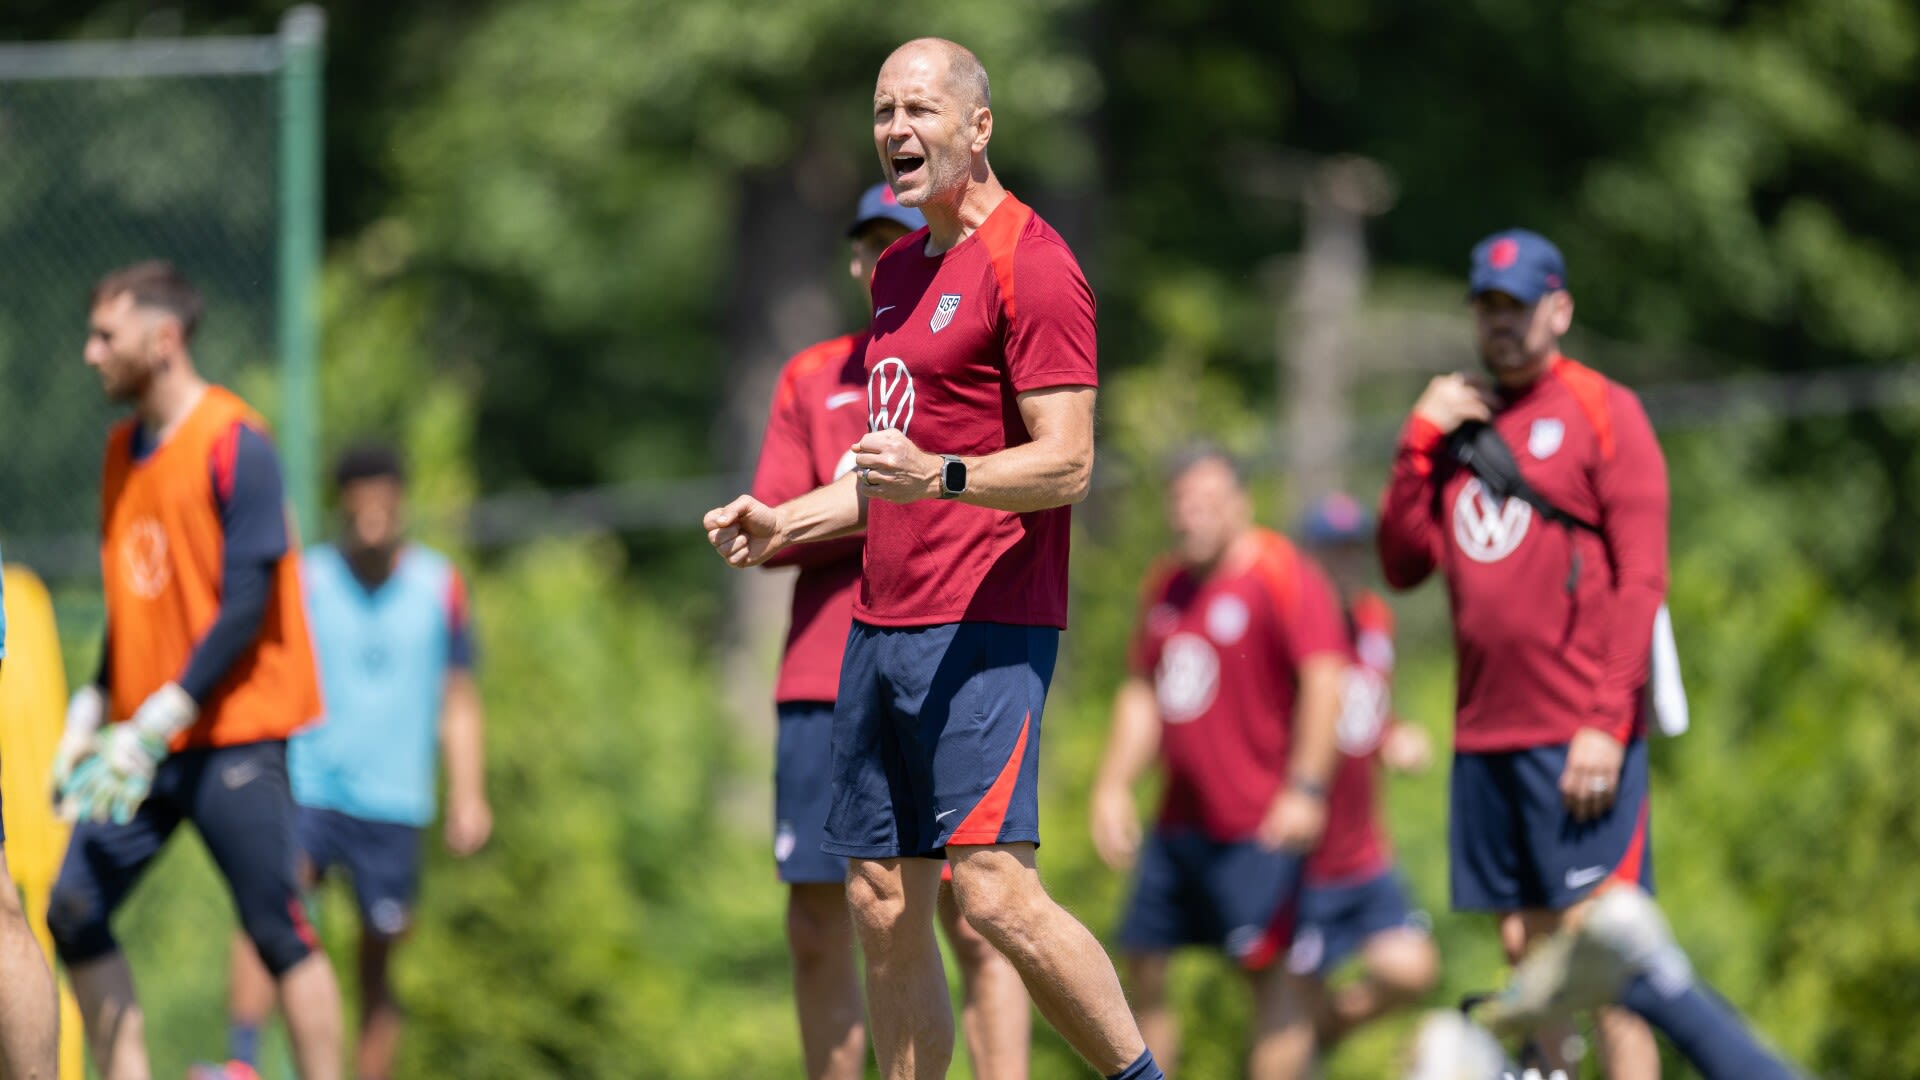 USMNT vs Colombia: How to watch live, stream link, team news